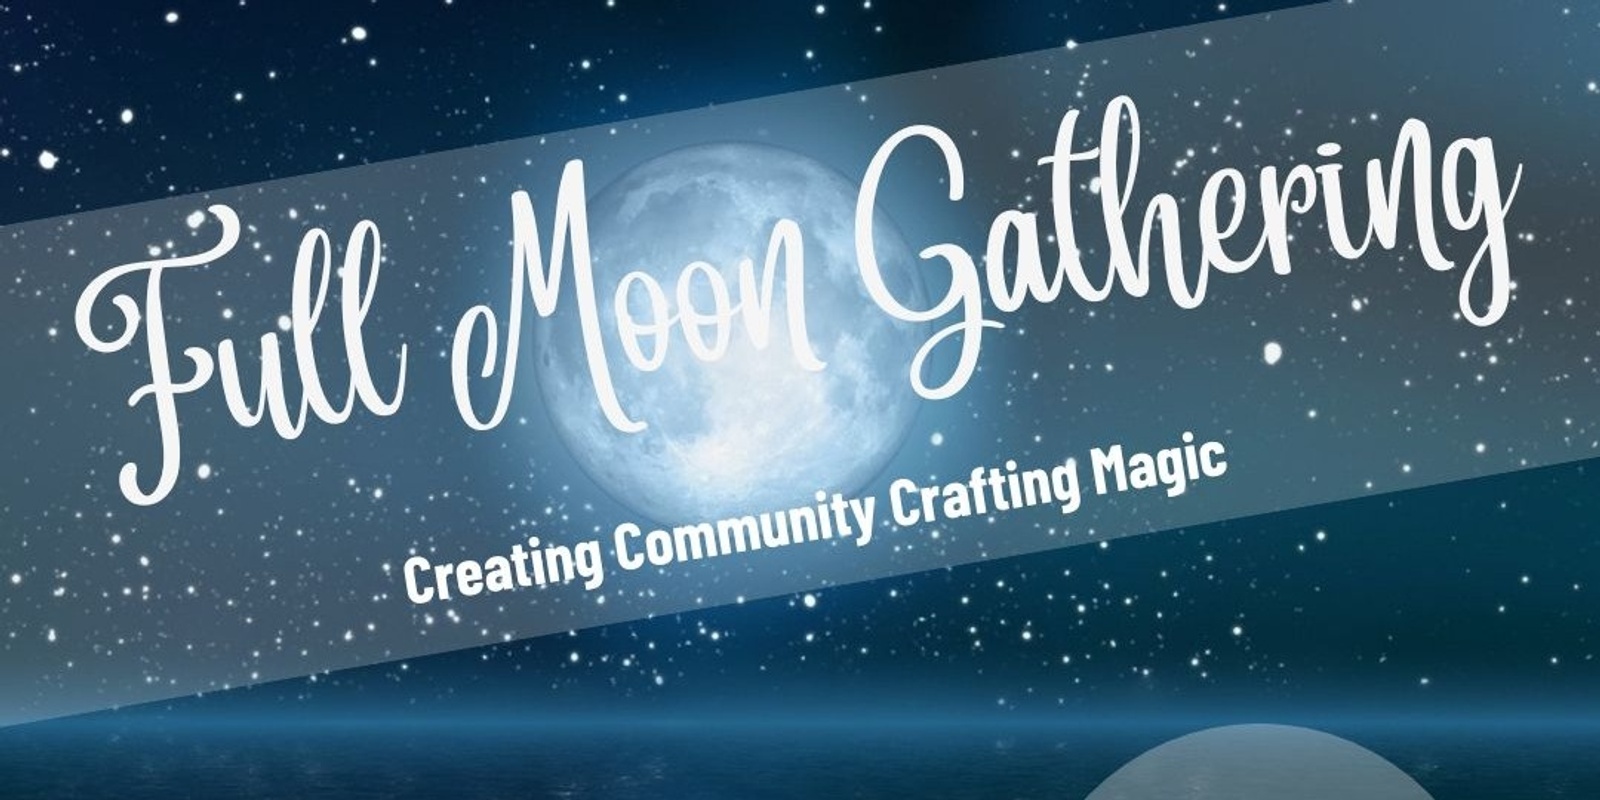 Banner image for August Full Moon Gathering at Largs Bay